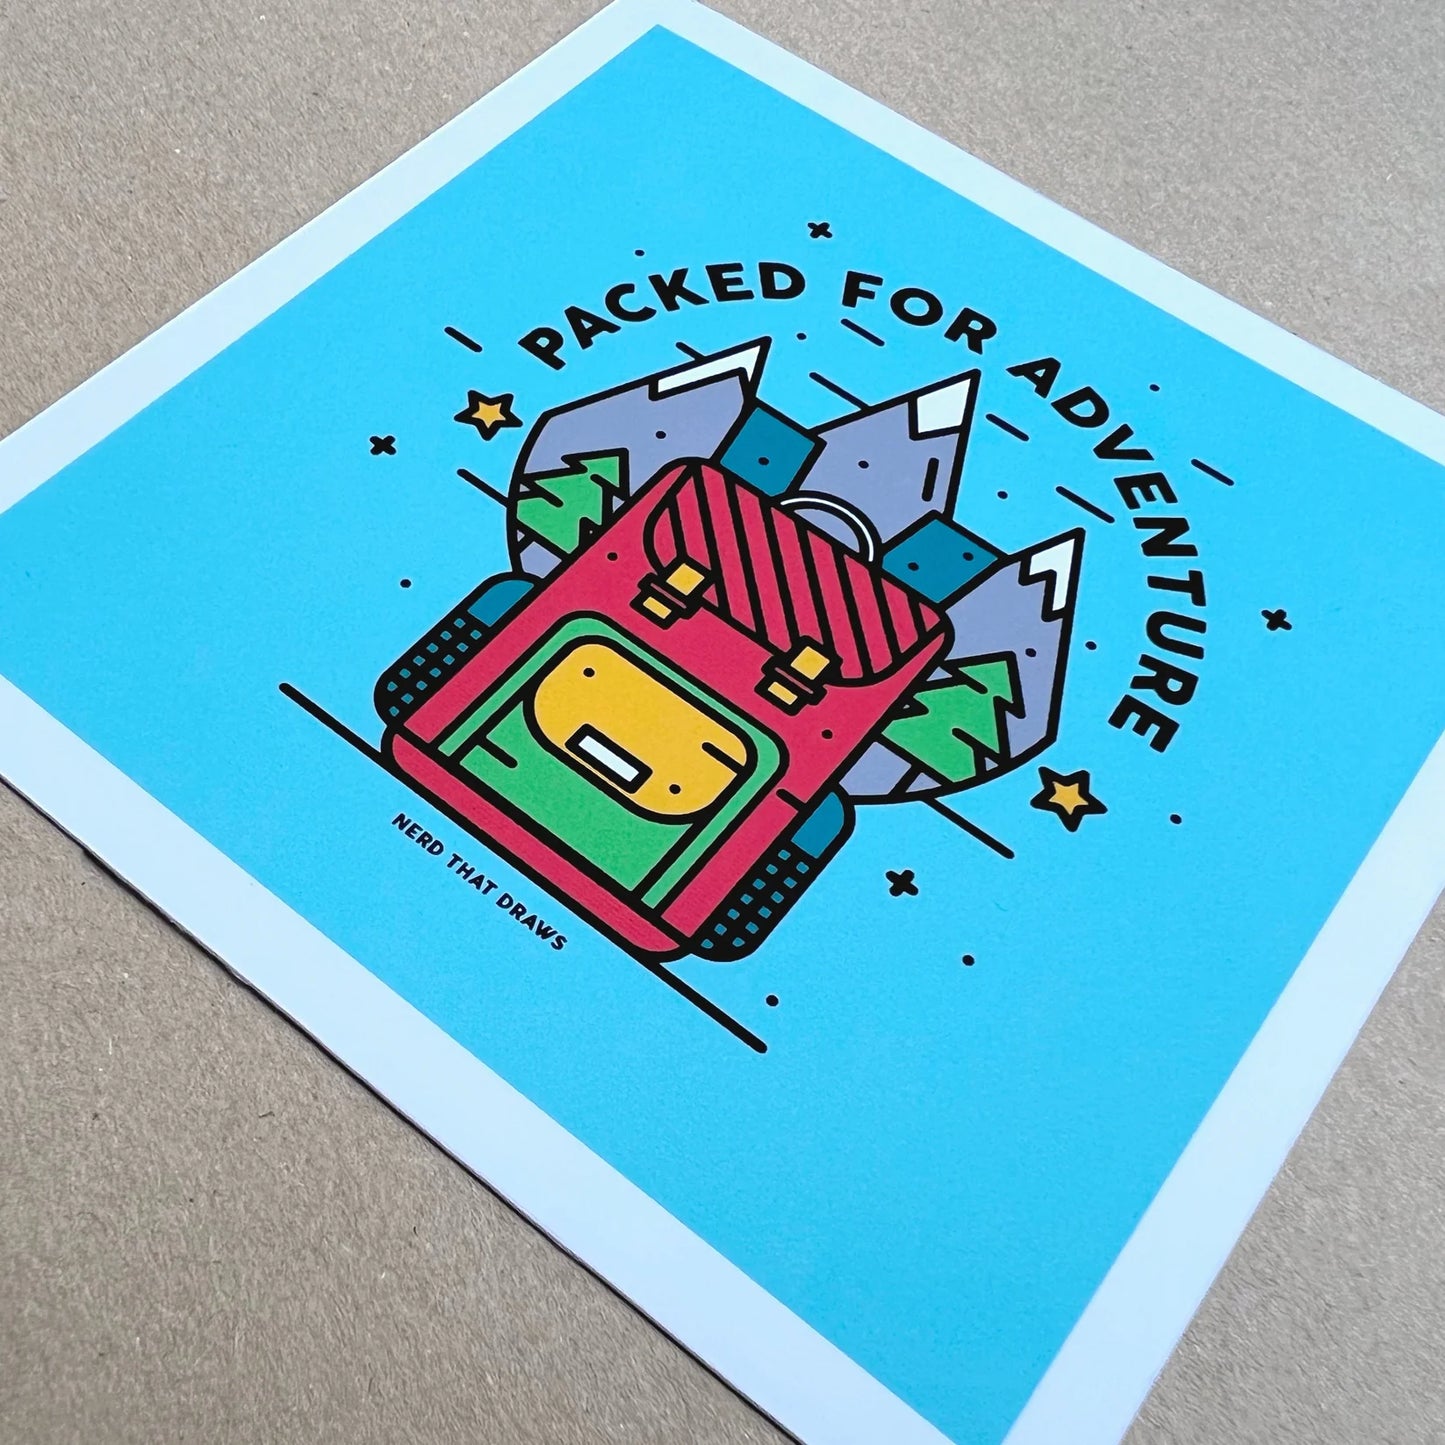 Nerd That Draws - Packed for Adventure - Square Art Print